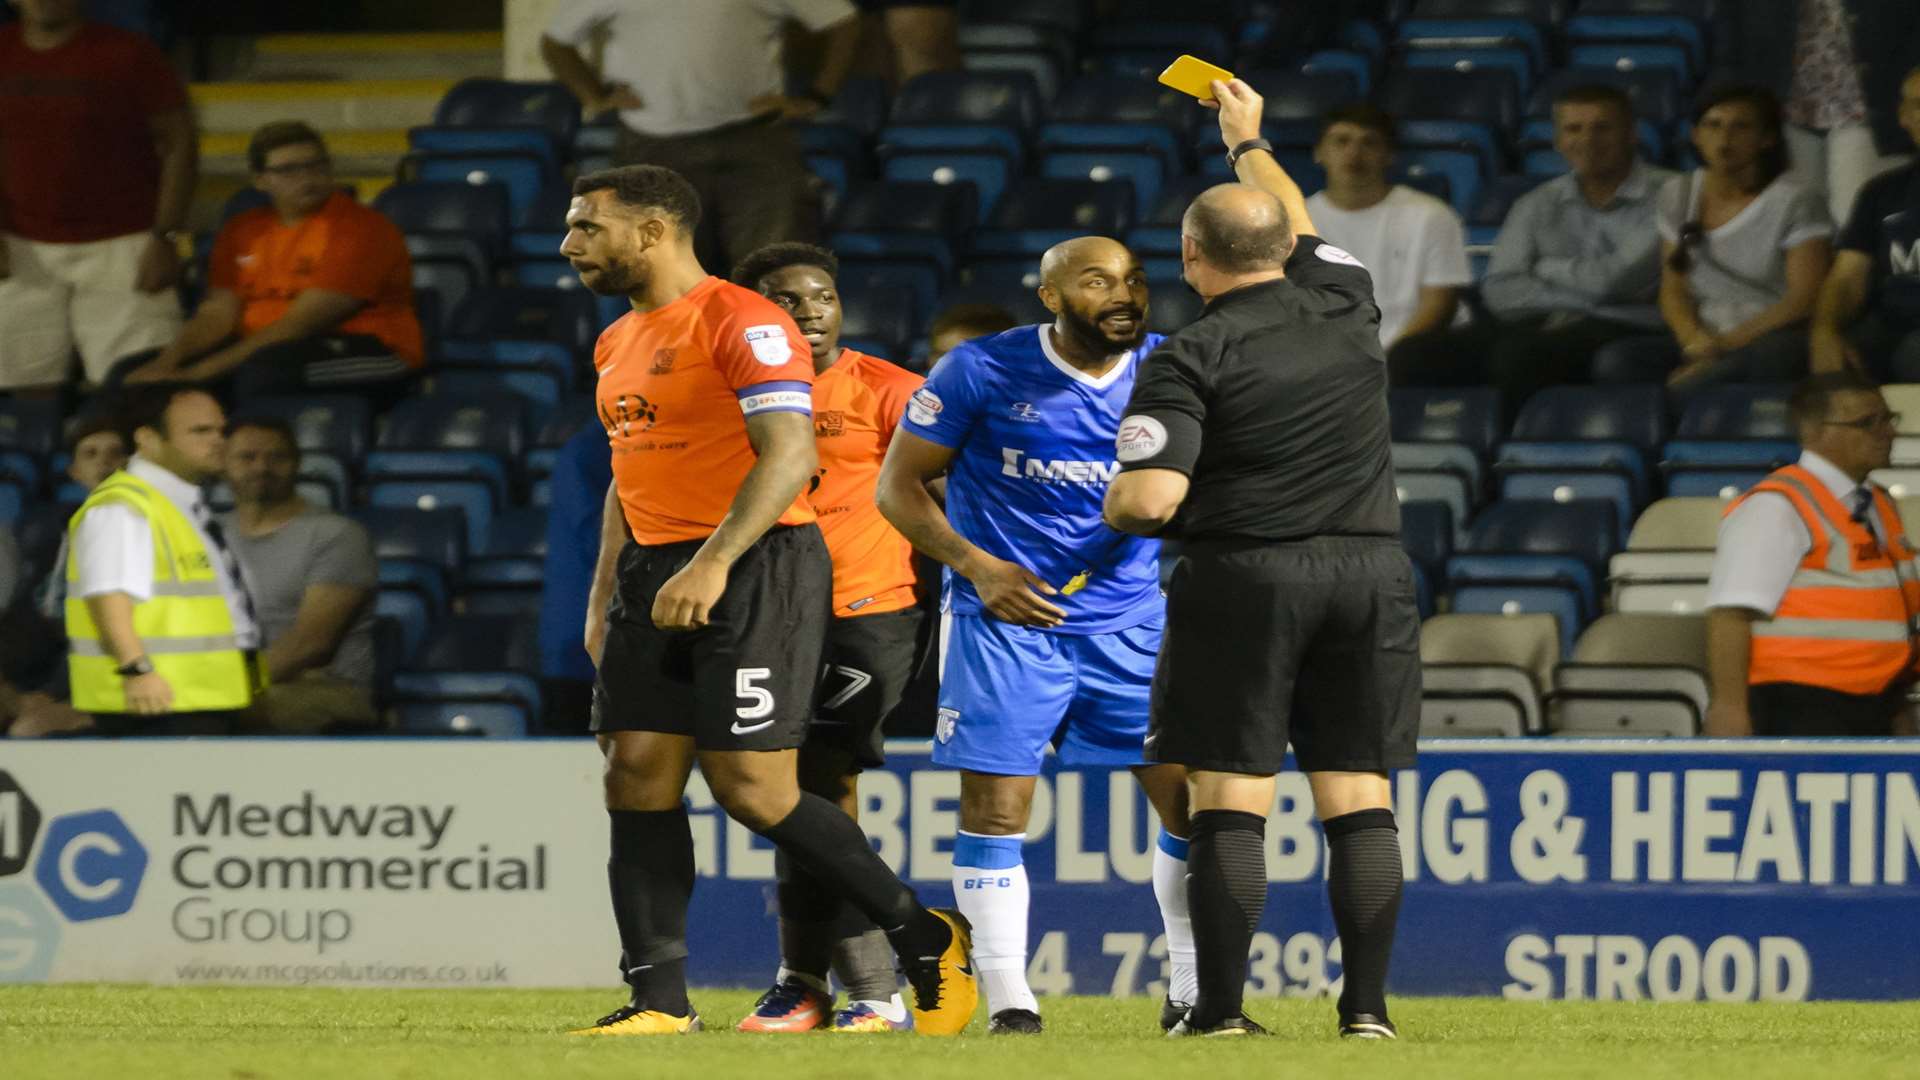 Josh Parker is booked for a foul Picture: Andy Payton